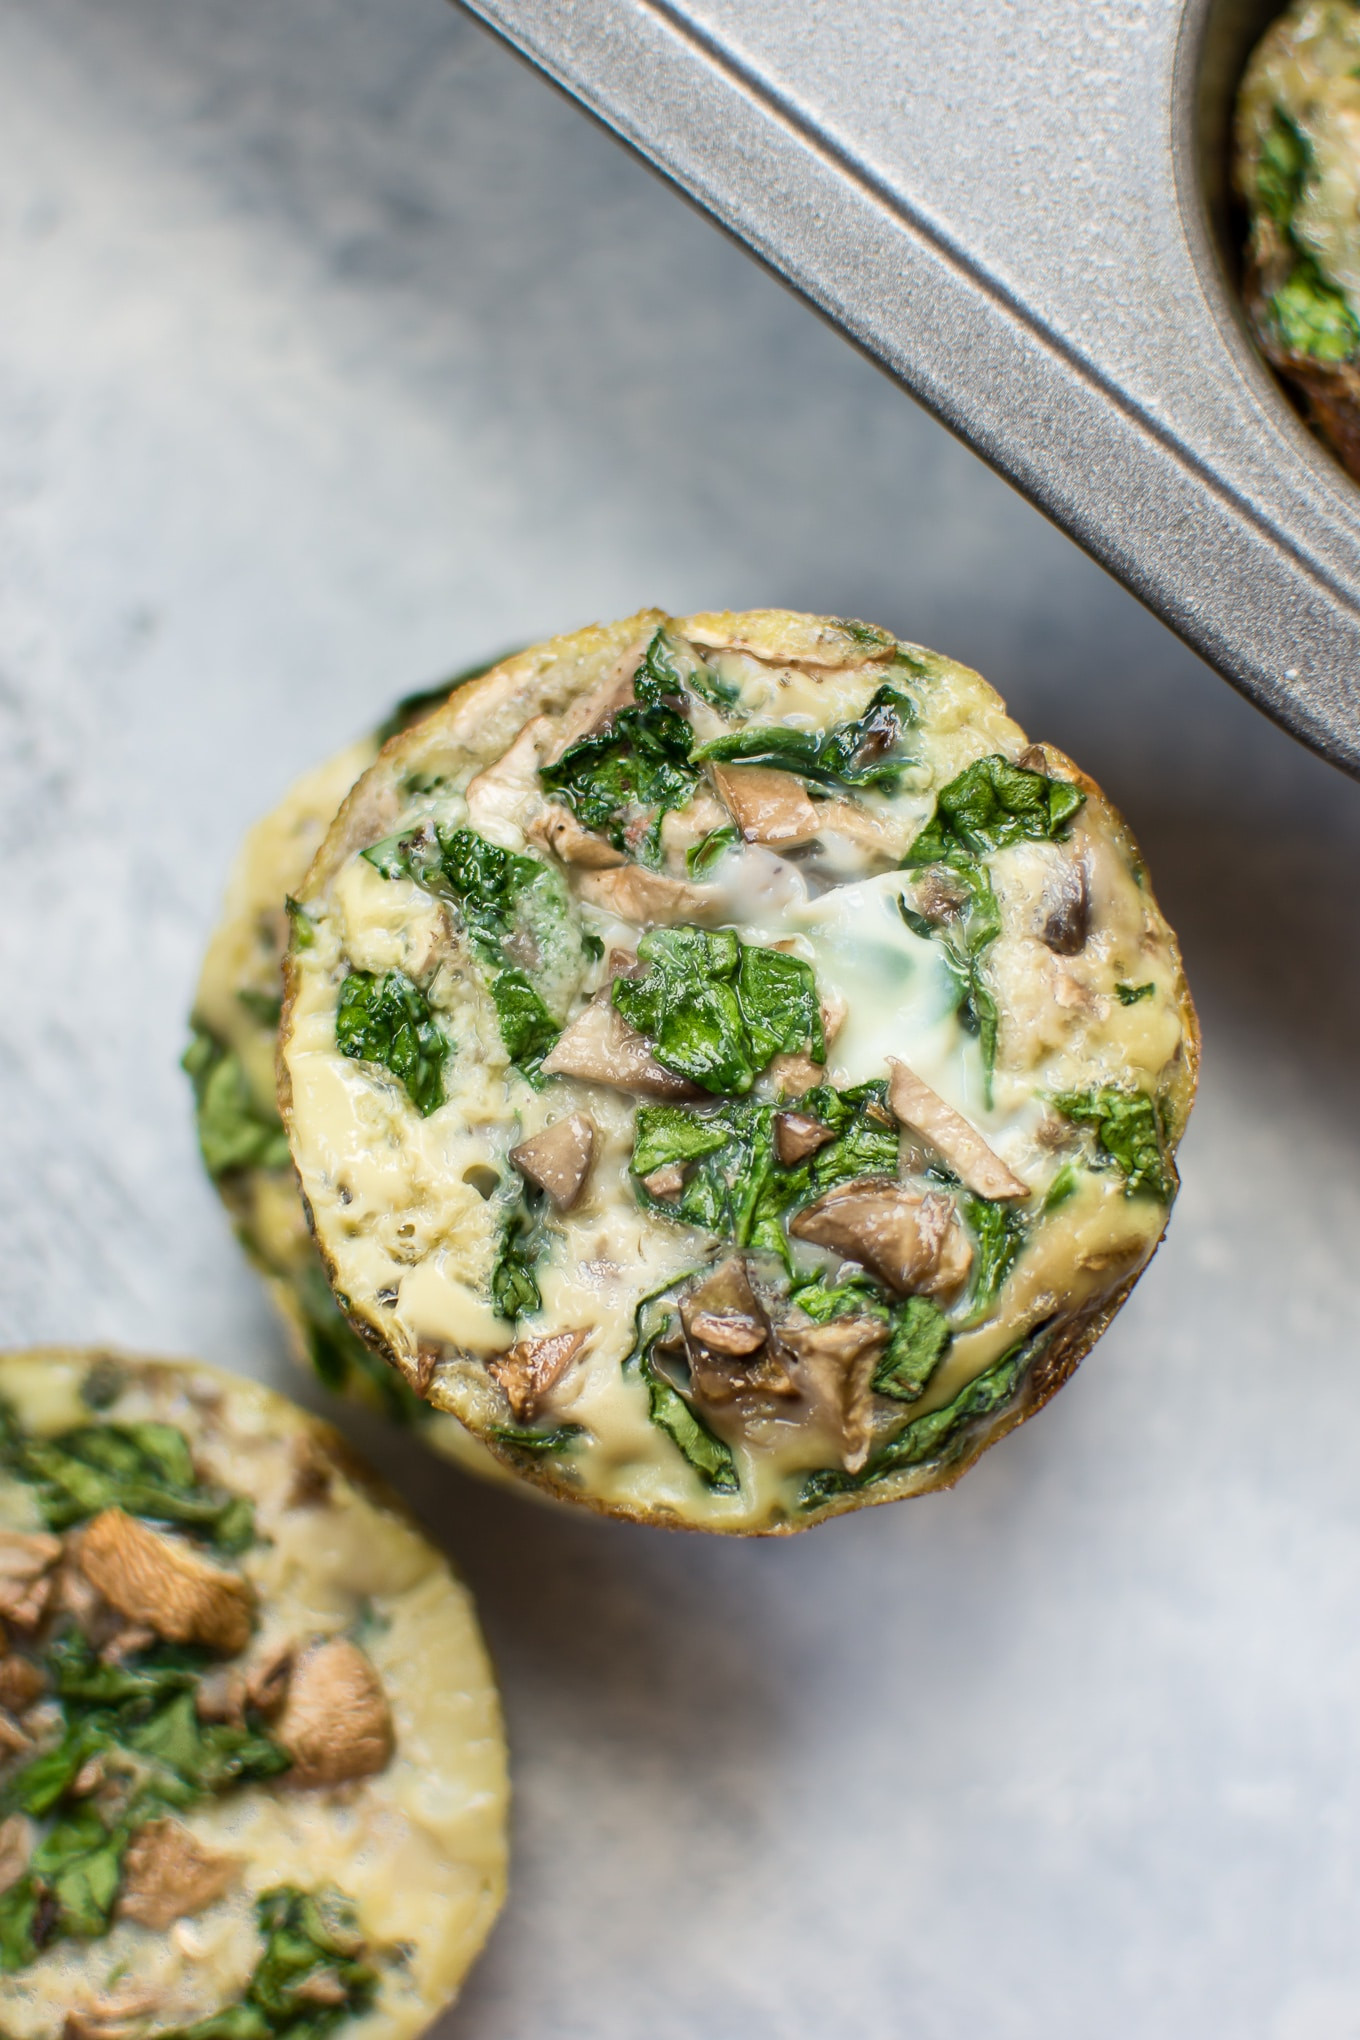 Healthy Breakfast Egg Muffins With Spinach
 Spinach and Mushroom Healthy Breakfast Egg Muffins • Salt